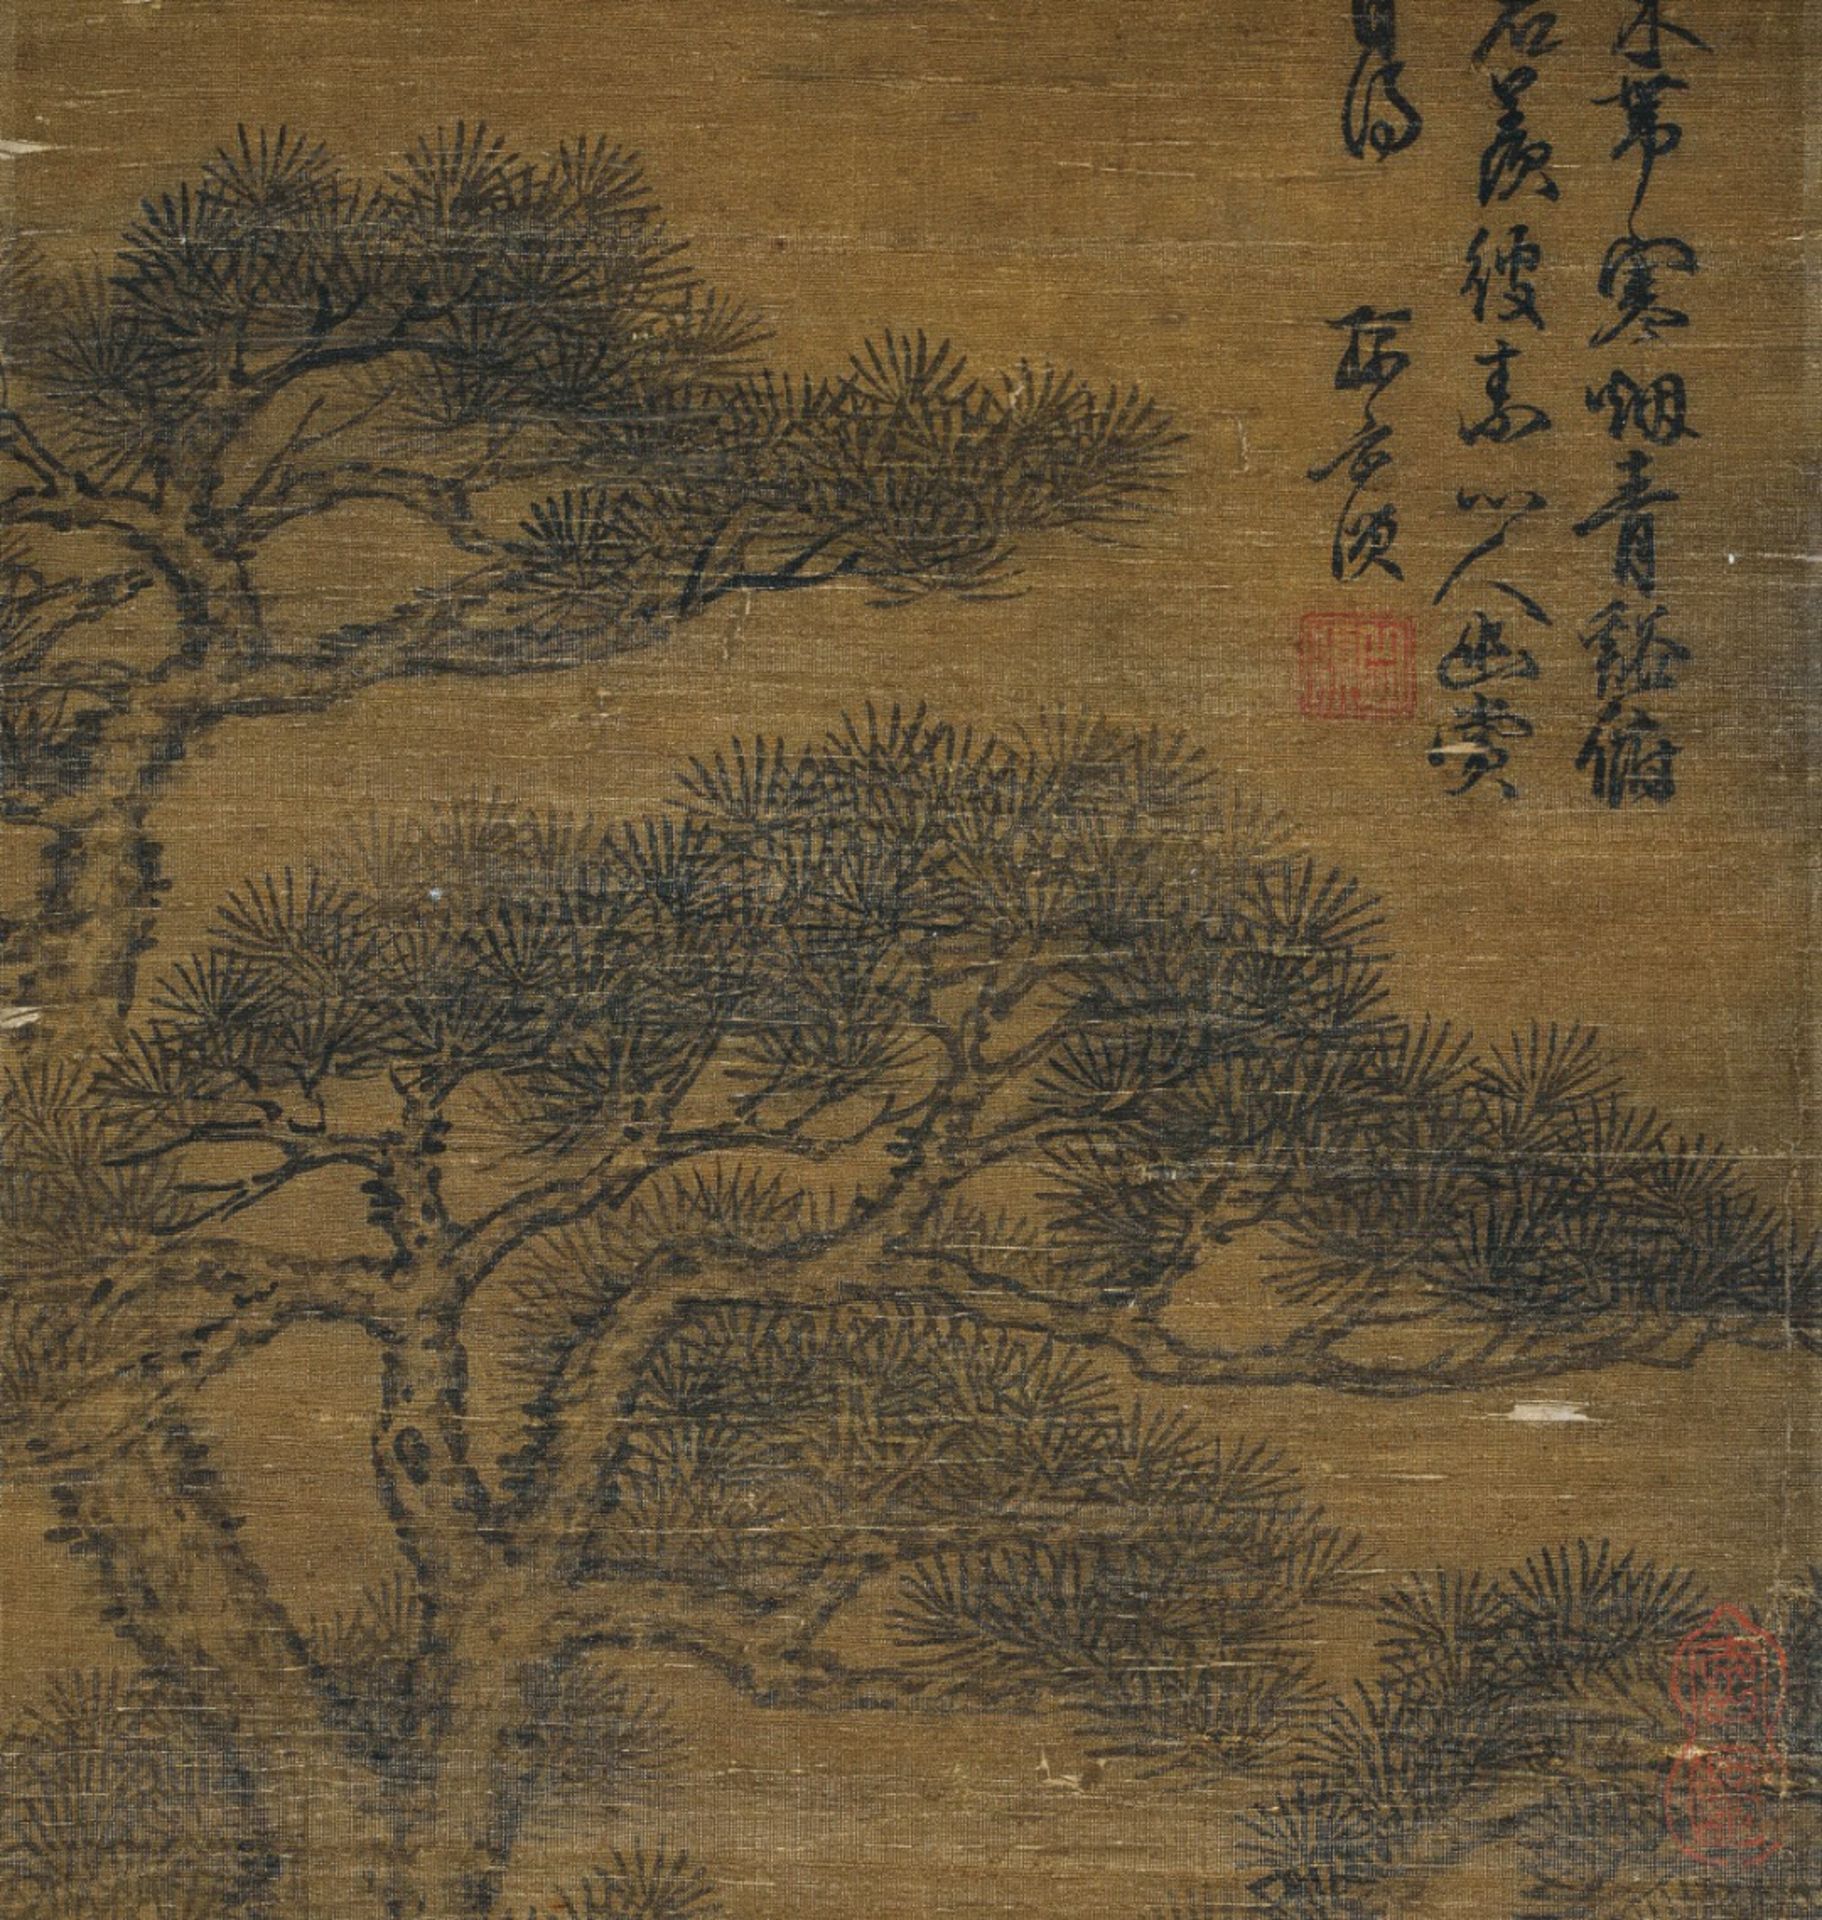 A Chinese Scroll Painting By Su Shi - Bild 6 aus 13